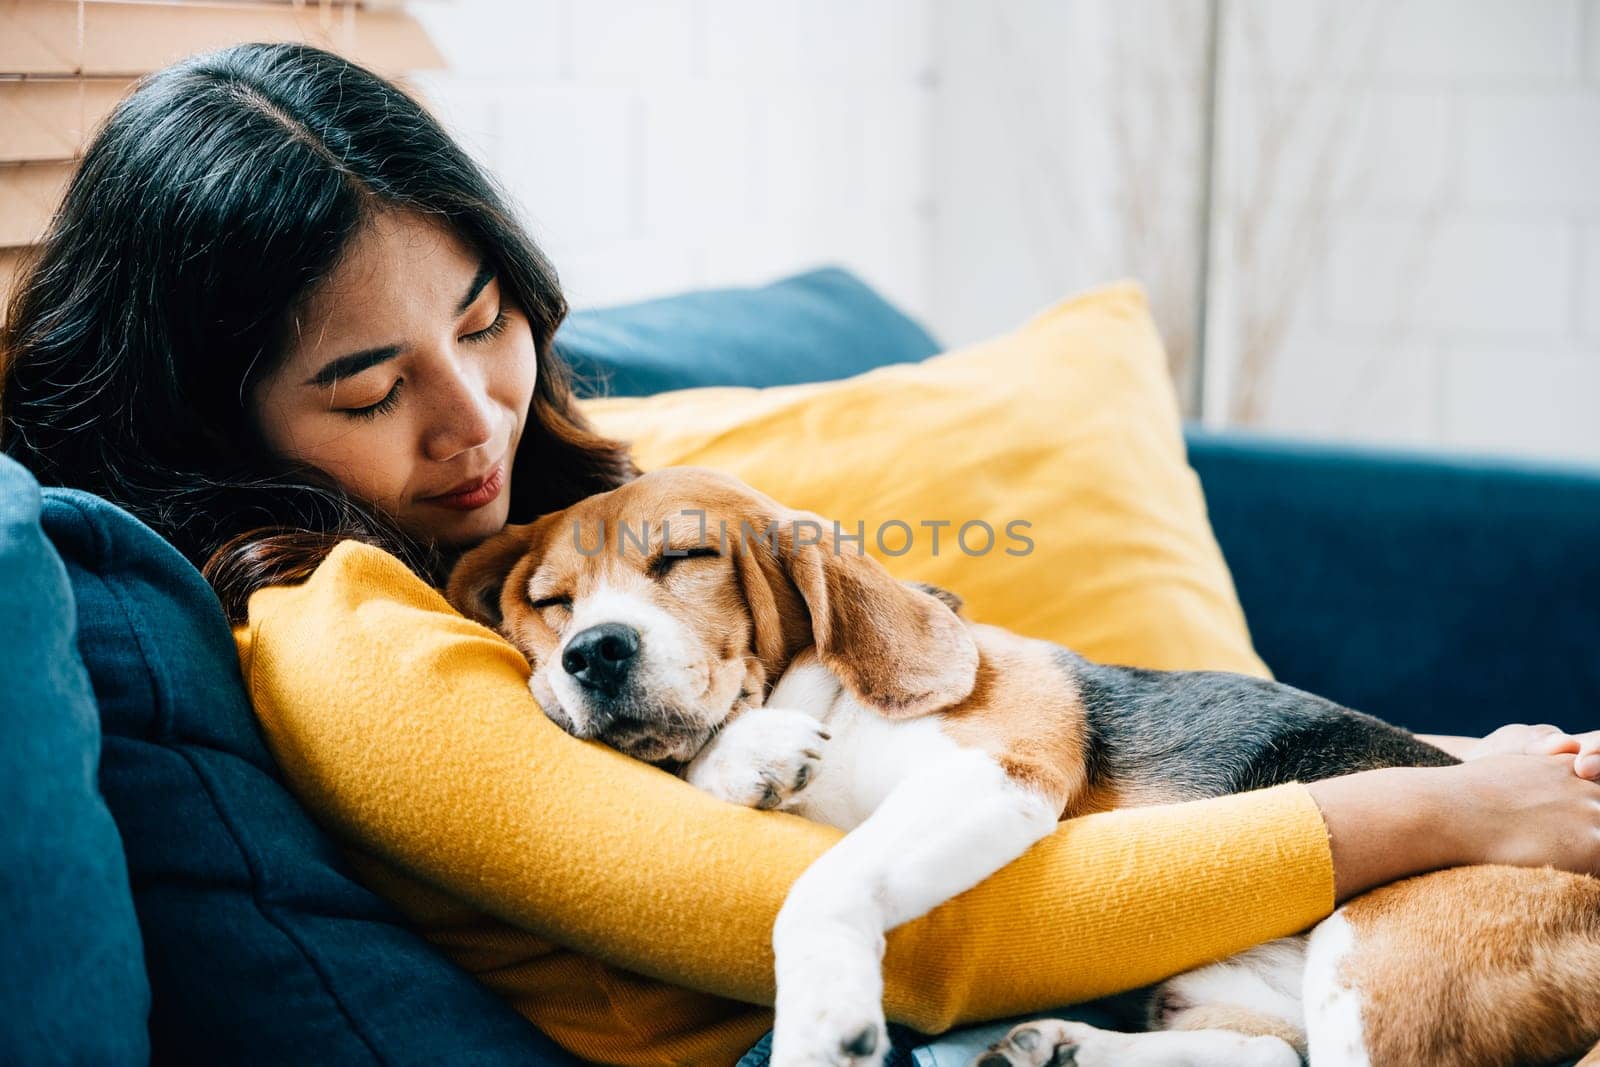 Embracing the concept of trust and love, an Asian woman and her Beagle puppy nap together on the sofa in their living room. Their bond is a beautiful portrayal of happiness and togetherness at home. by Sorapop